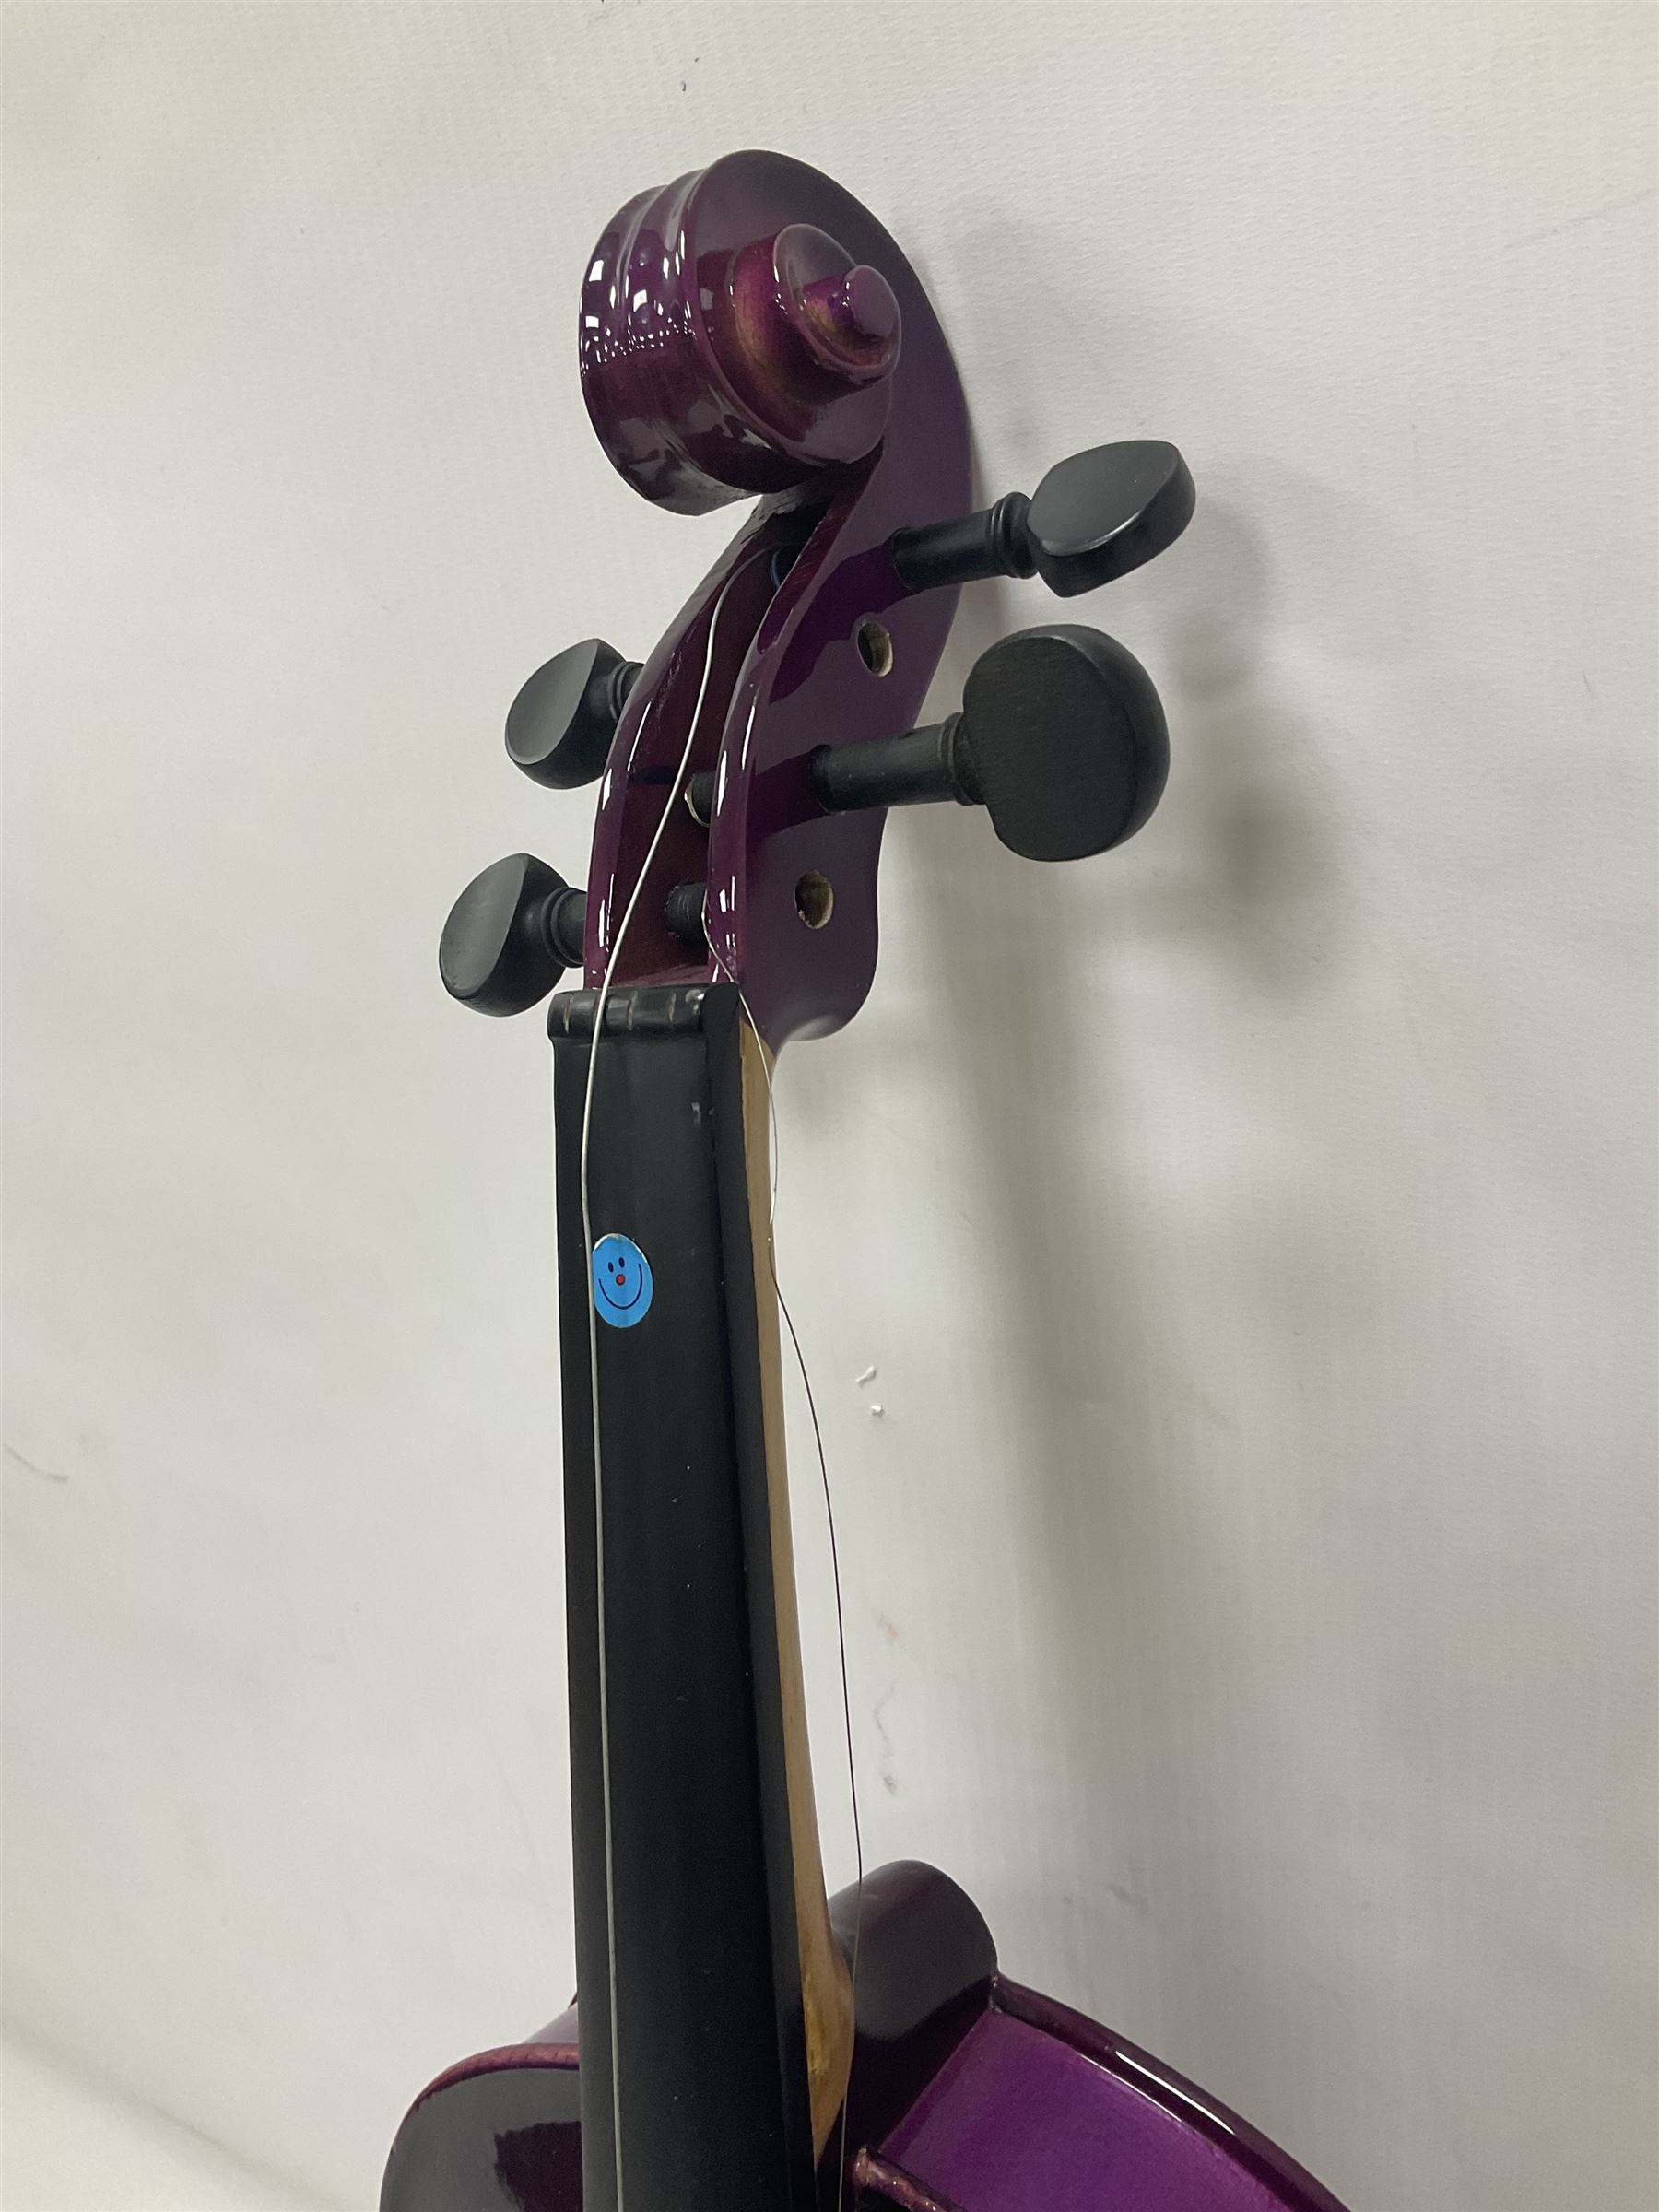 Intermusic 3/4 violin with a violet coloured solid wood body - Image 11 of 25